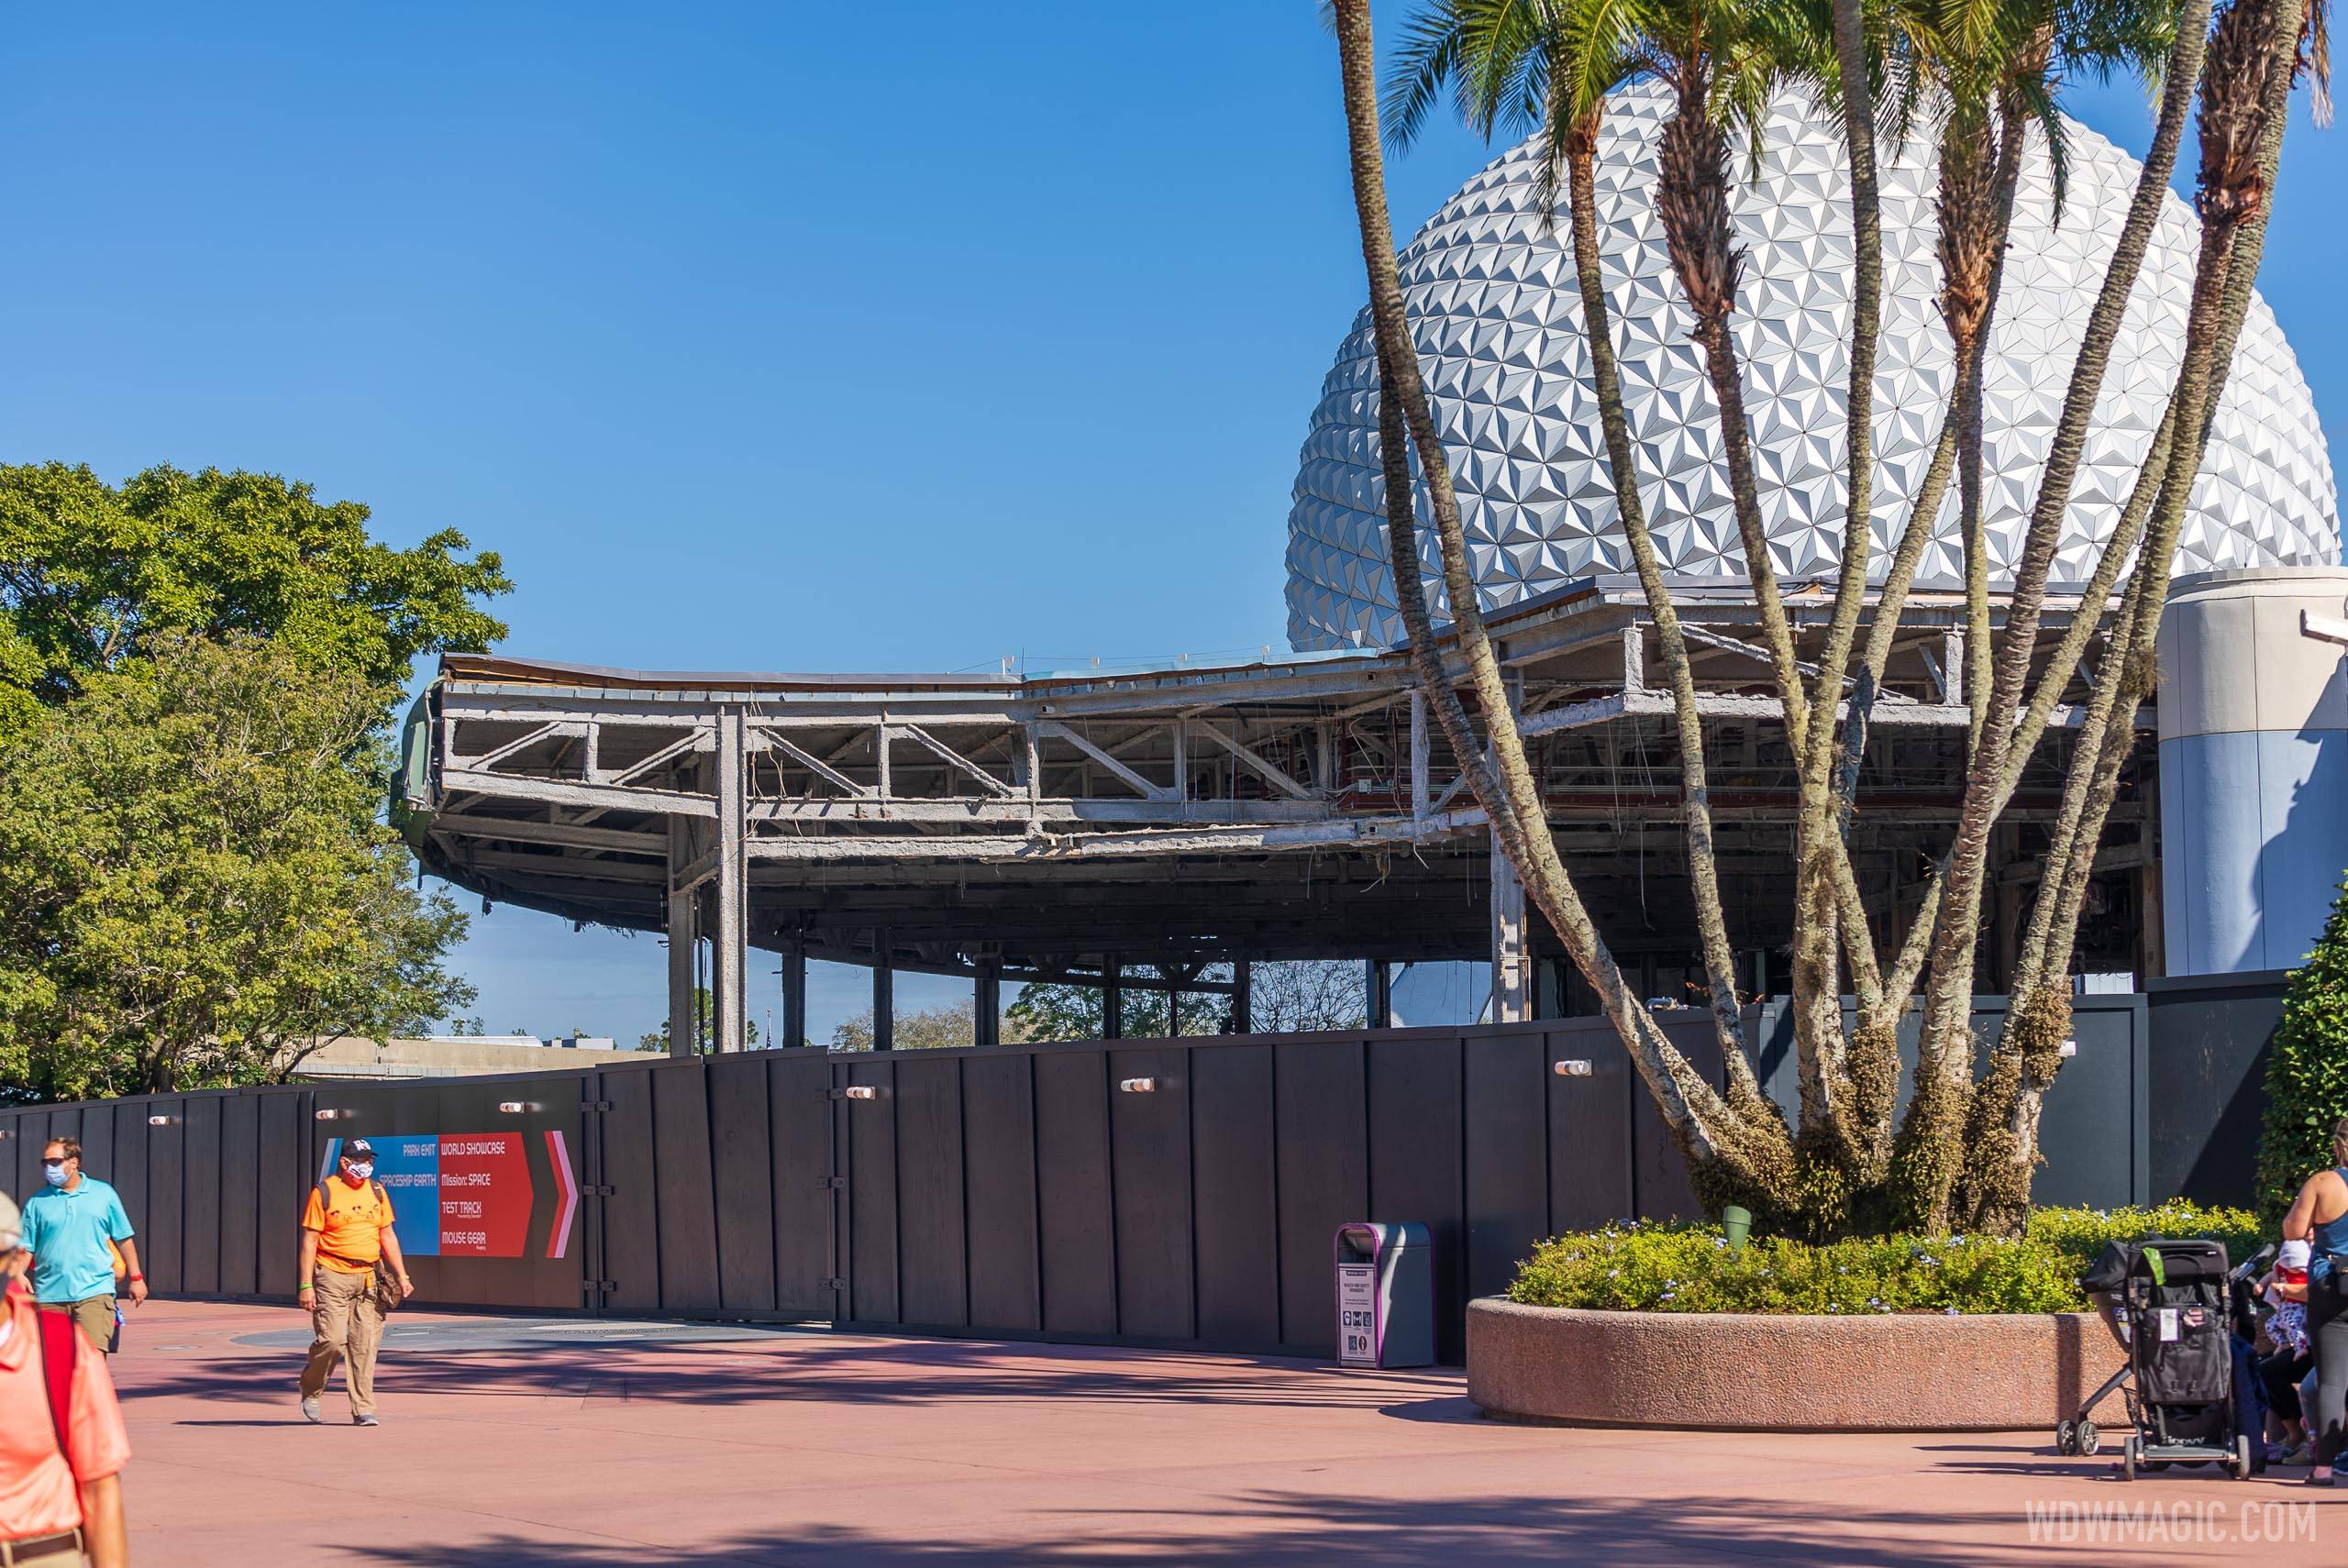 PHOTOS - Most of the walls removed in latest Innoventions West demolition work at EPCOT